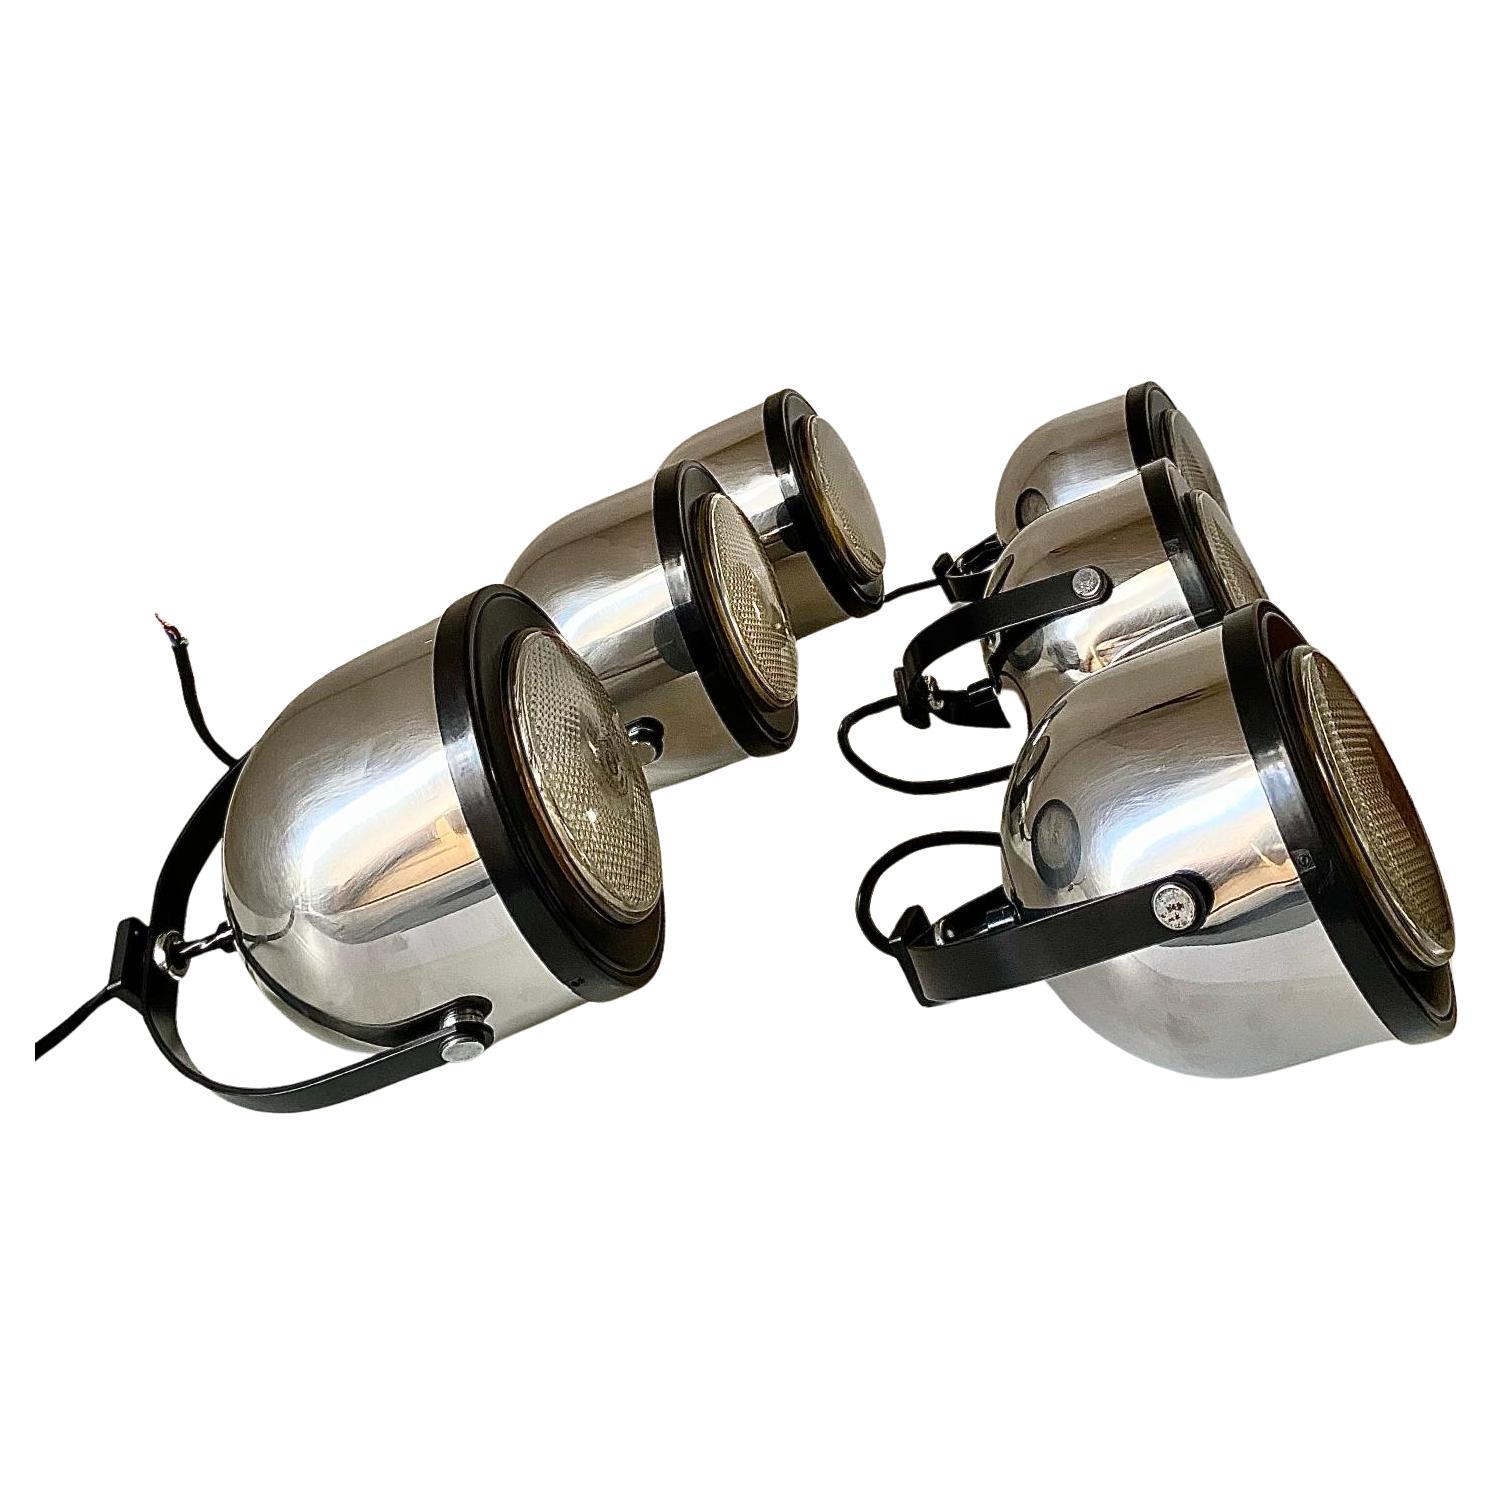 Rare Chromed Wall Sconces designed by italian design legends Gae Aulenti and Livio Castiglioni for Stilnovo in the 1970 's. 

Chromed aluminium body with blck metal light frame and structure.
Flexible lightining system that allows to point the